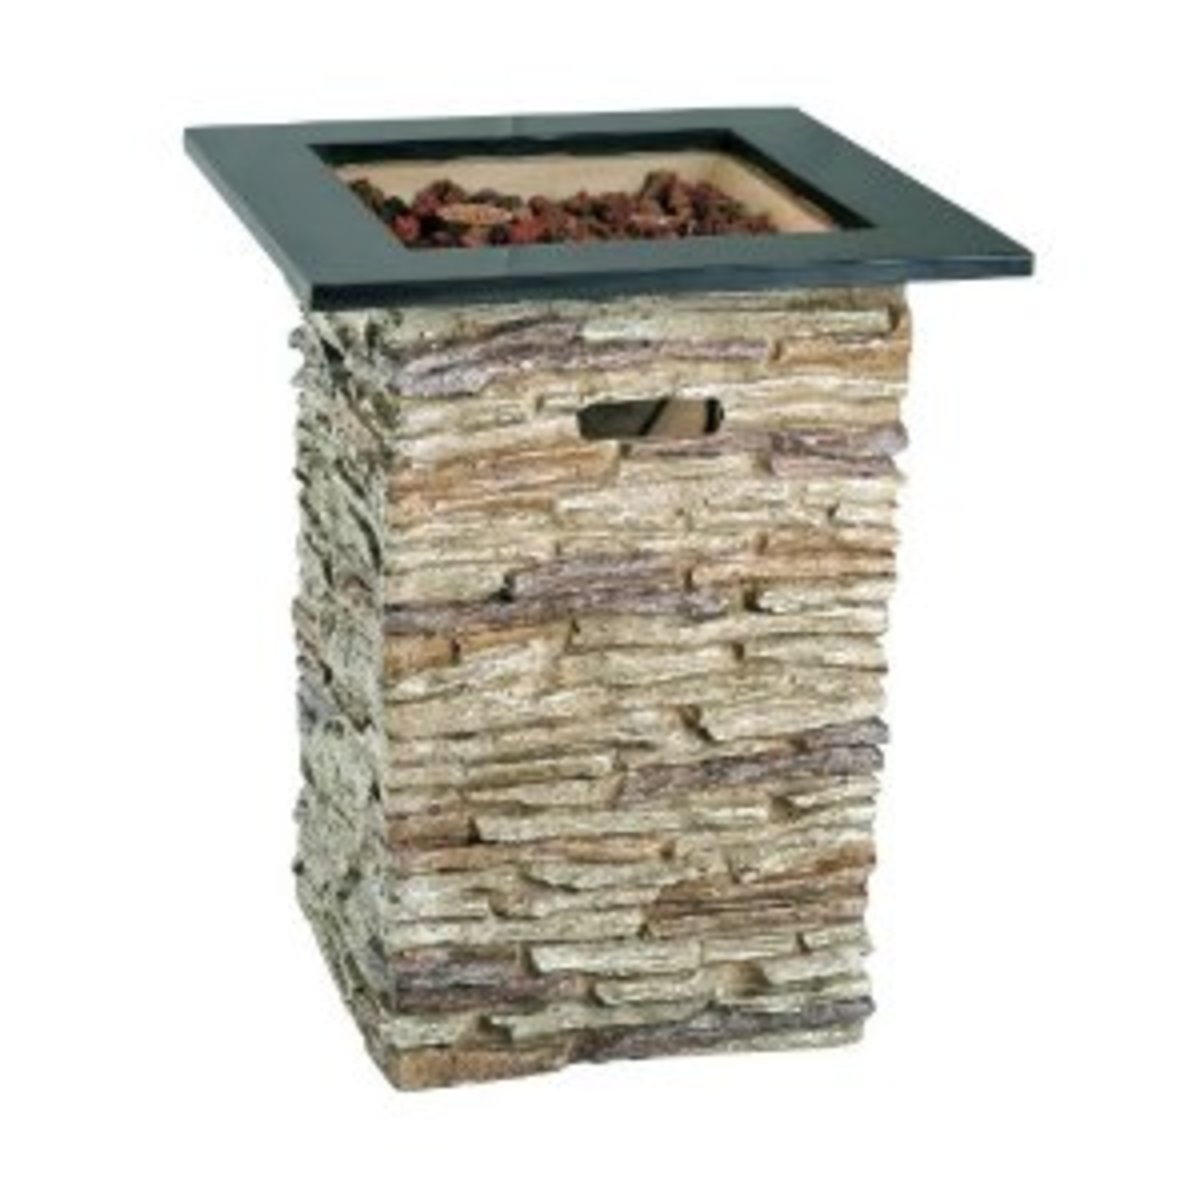 Outdoor propane fireplaces provide instant heat. Stone outdoor fireplaces are available in several styles.